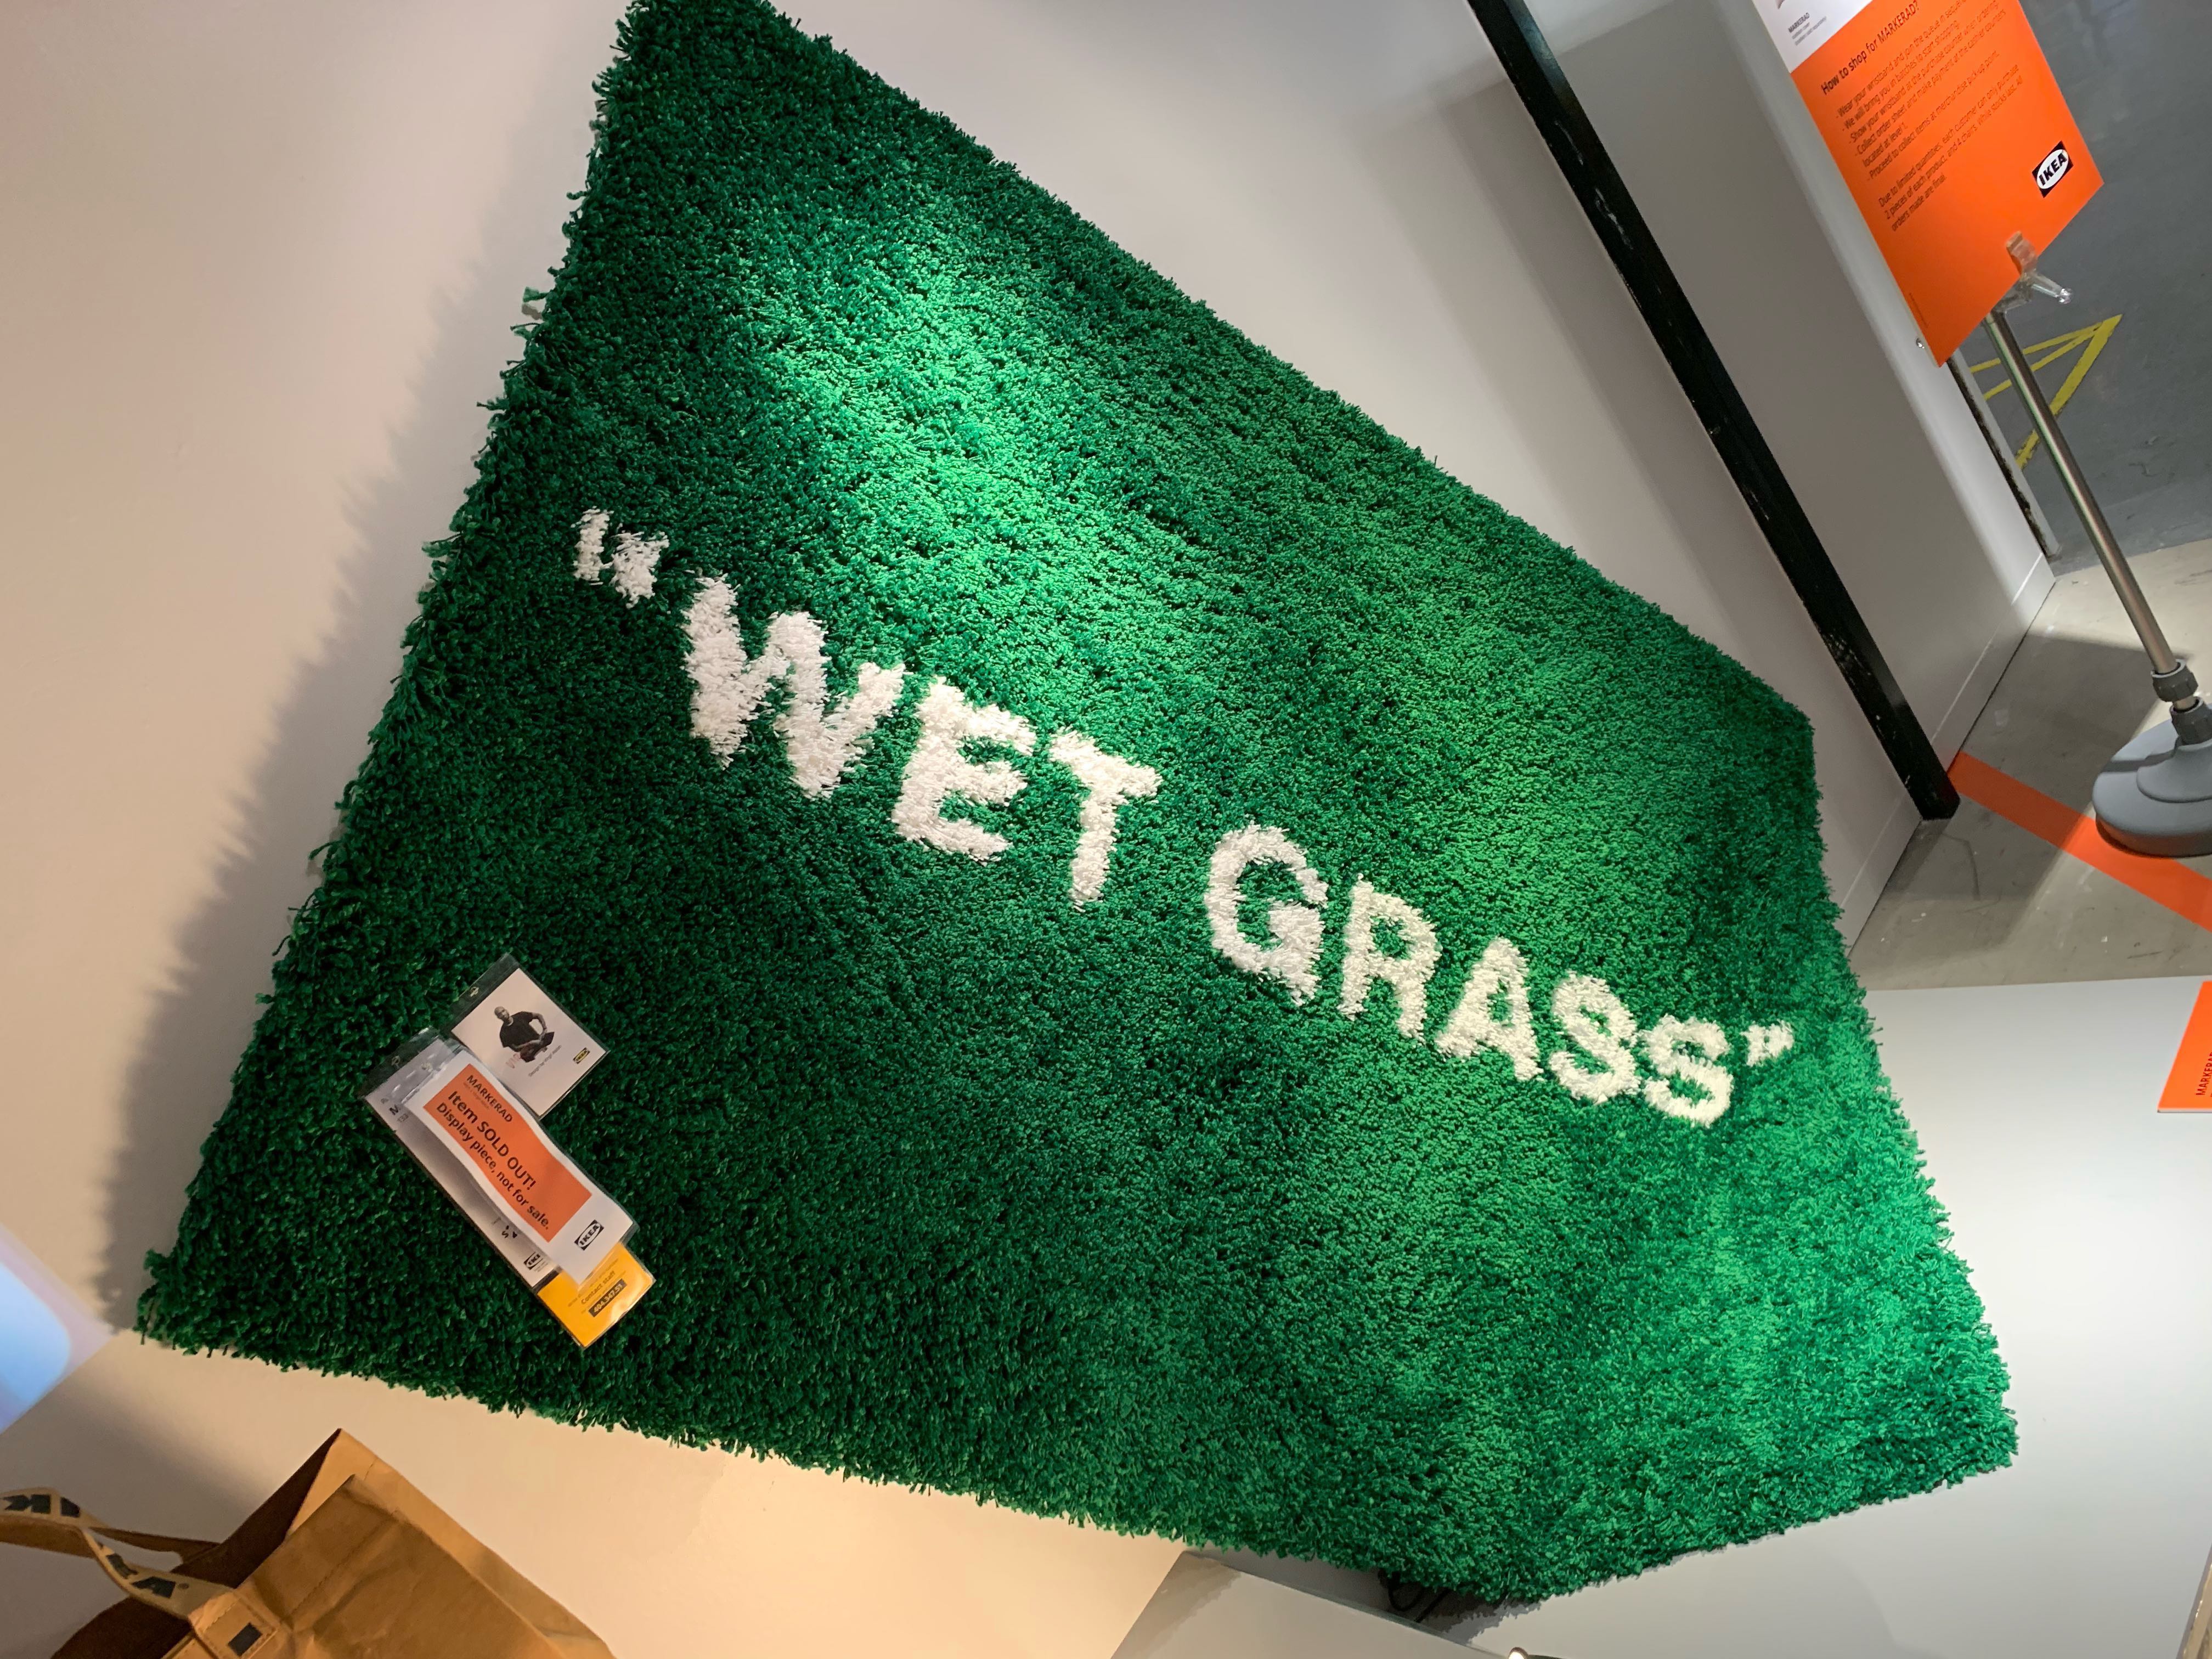 Virgil Abloh, Wet Grass (2019), Available for Sale